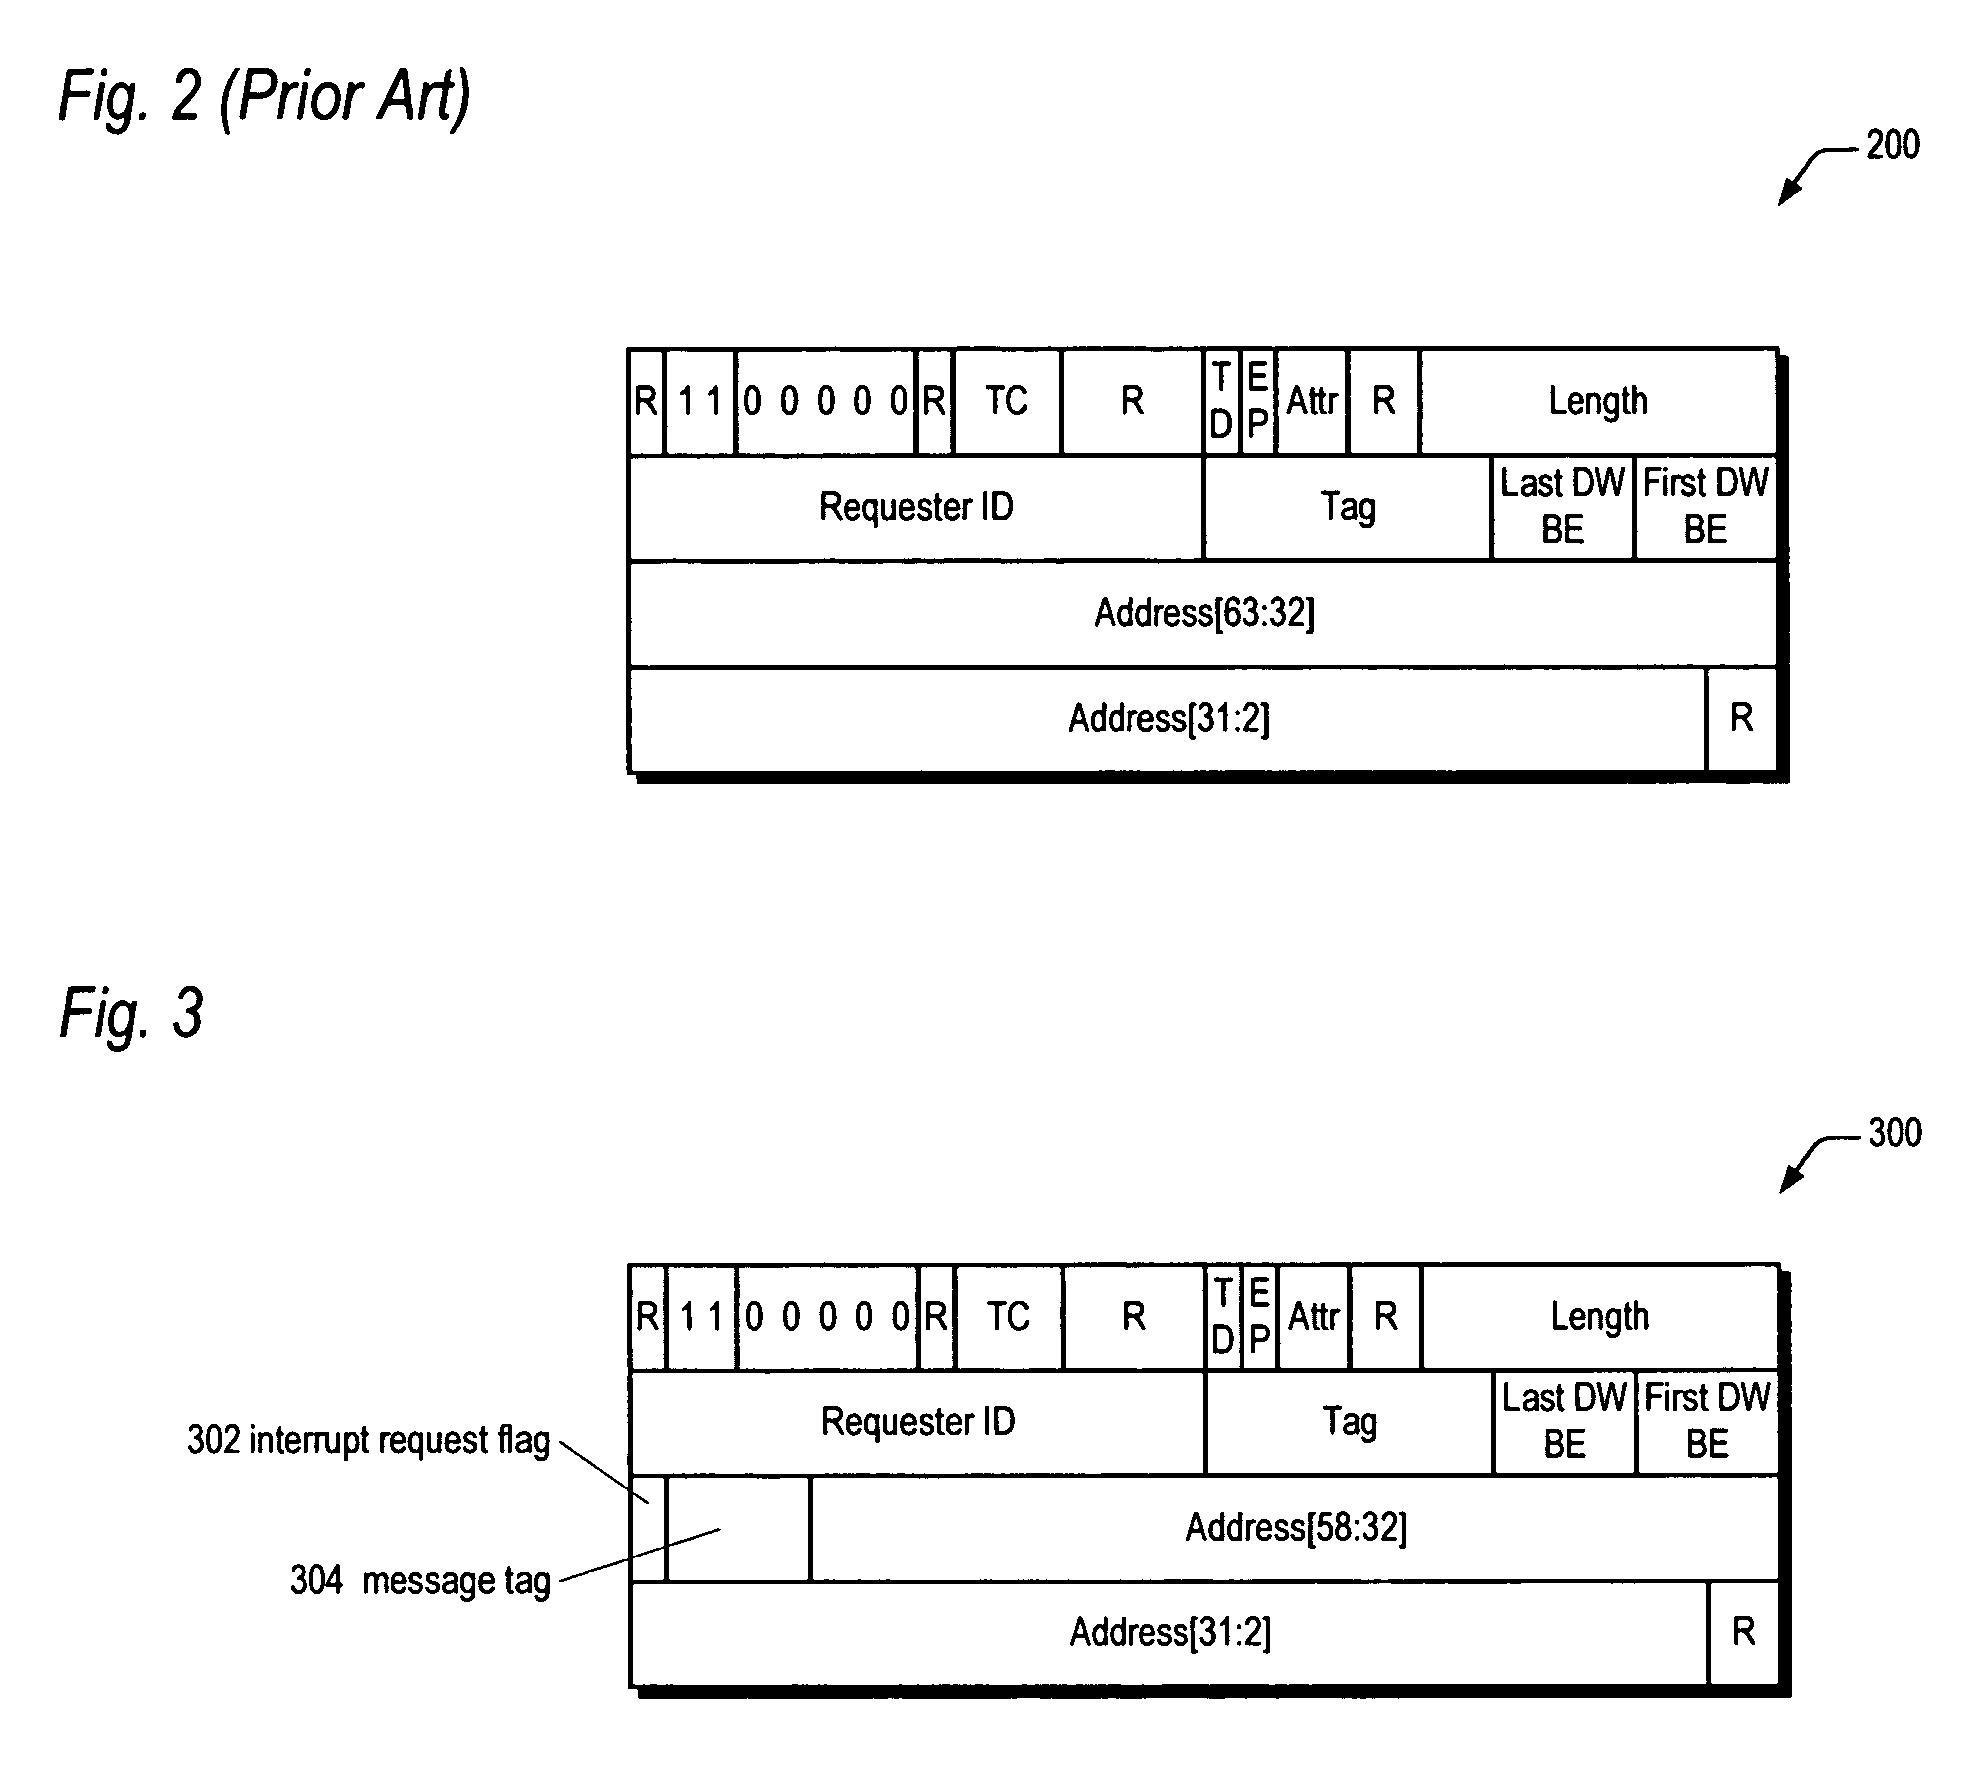 Method for efficient inter-processor communication in an active-active RAID system using PCI-express links